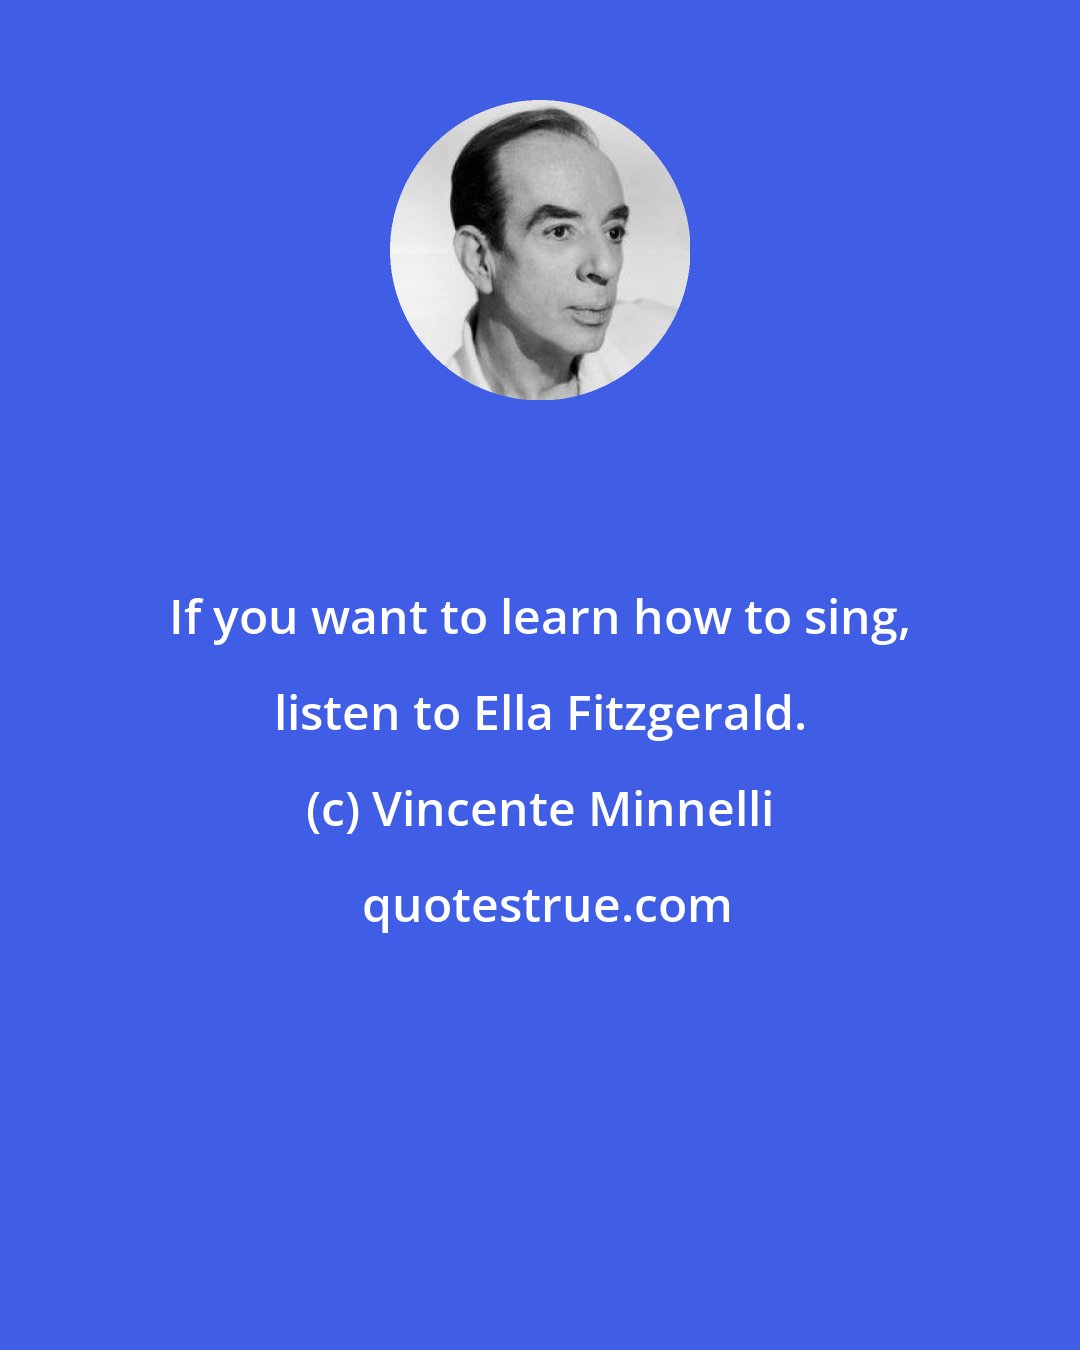 Vincente Minnelli: If you want to learn how to sing, listen to Ella Fitzgerald.